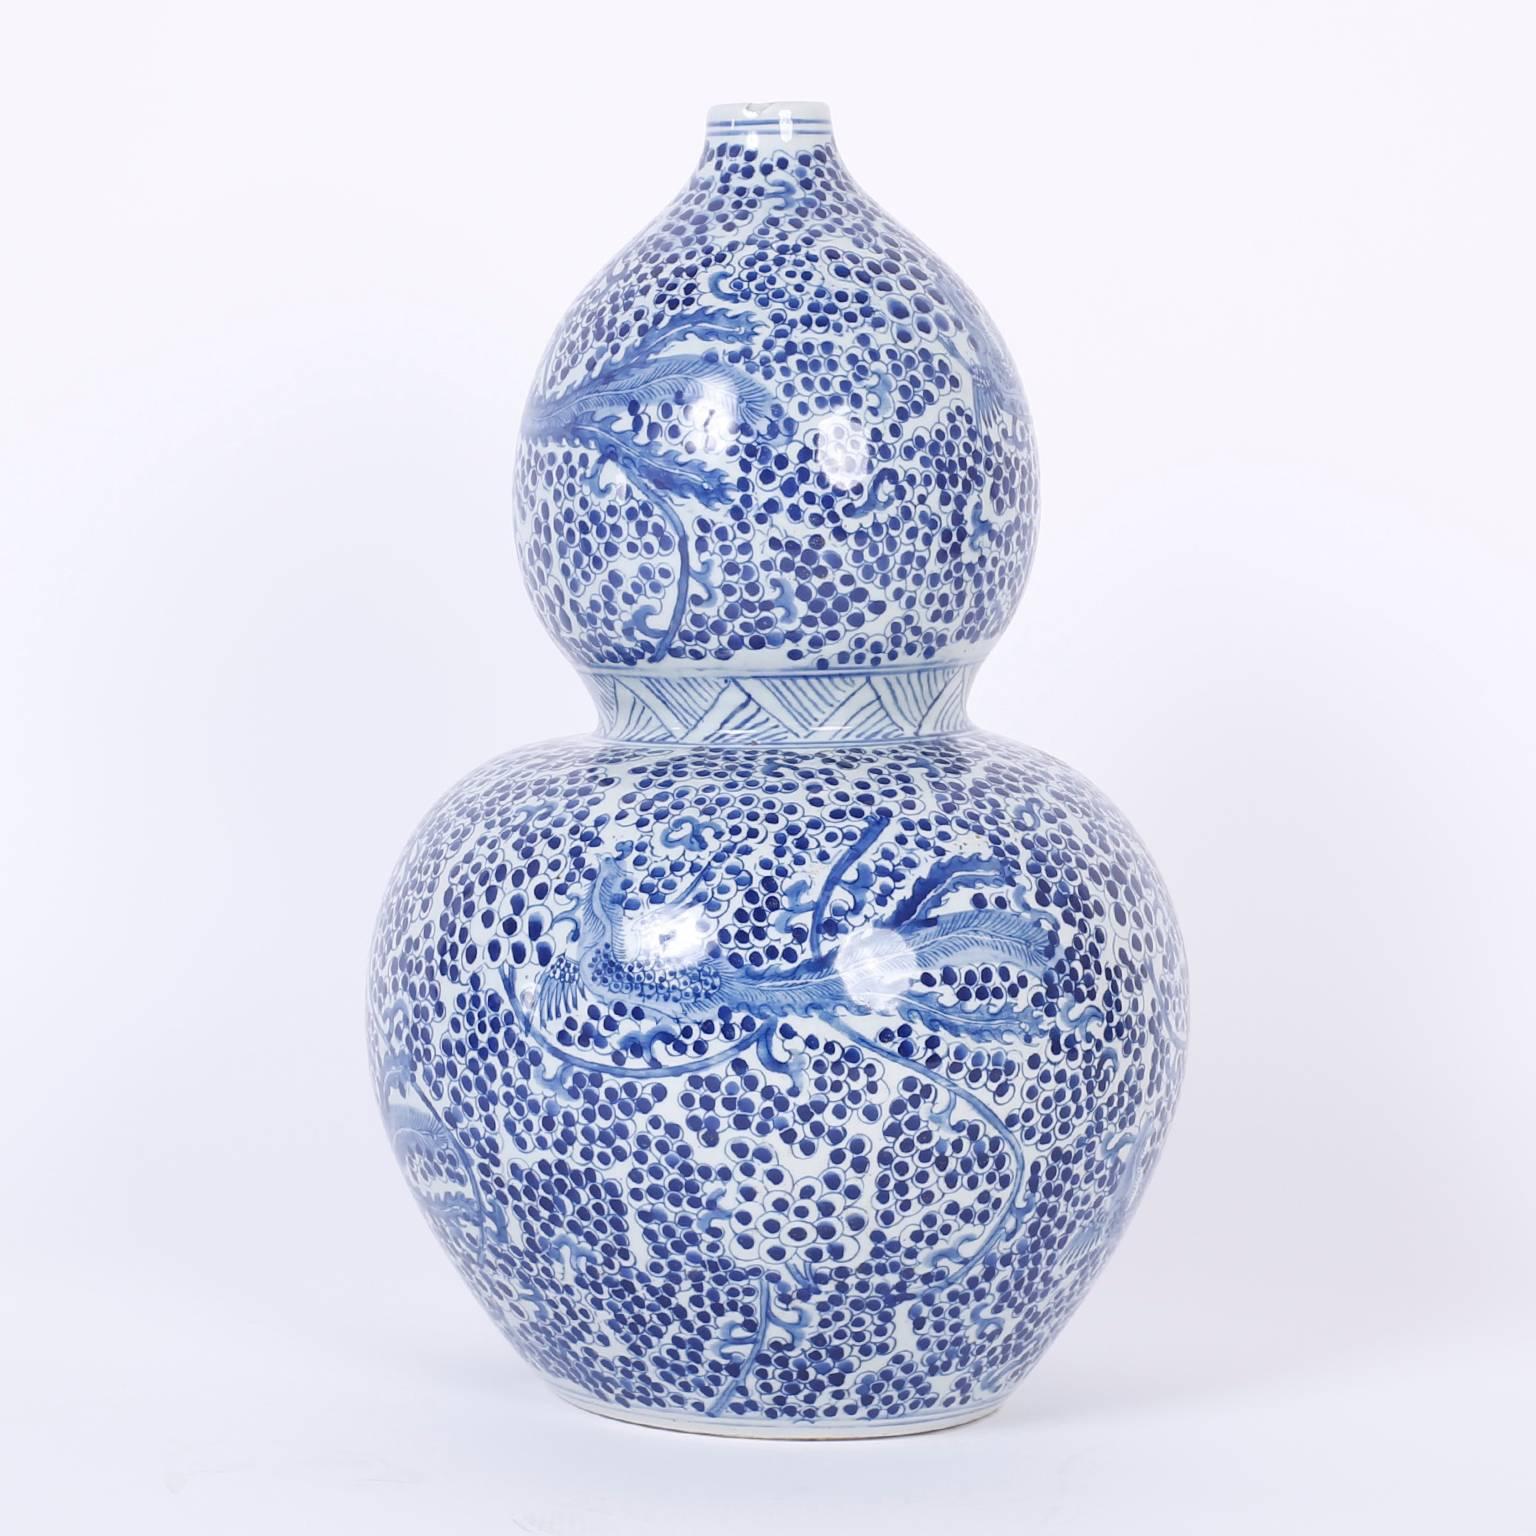 Vogue pair of Chinese blue and white porcelain vases decorated with phoenix birds over a busy field. The hip double gourd form keeps this Classic art form fresh.